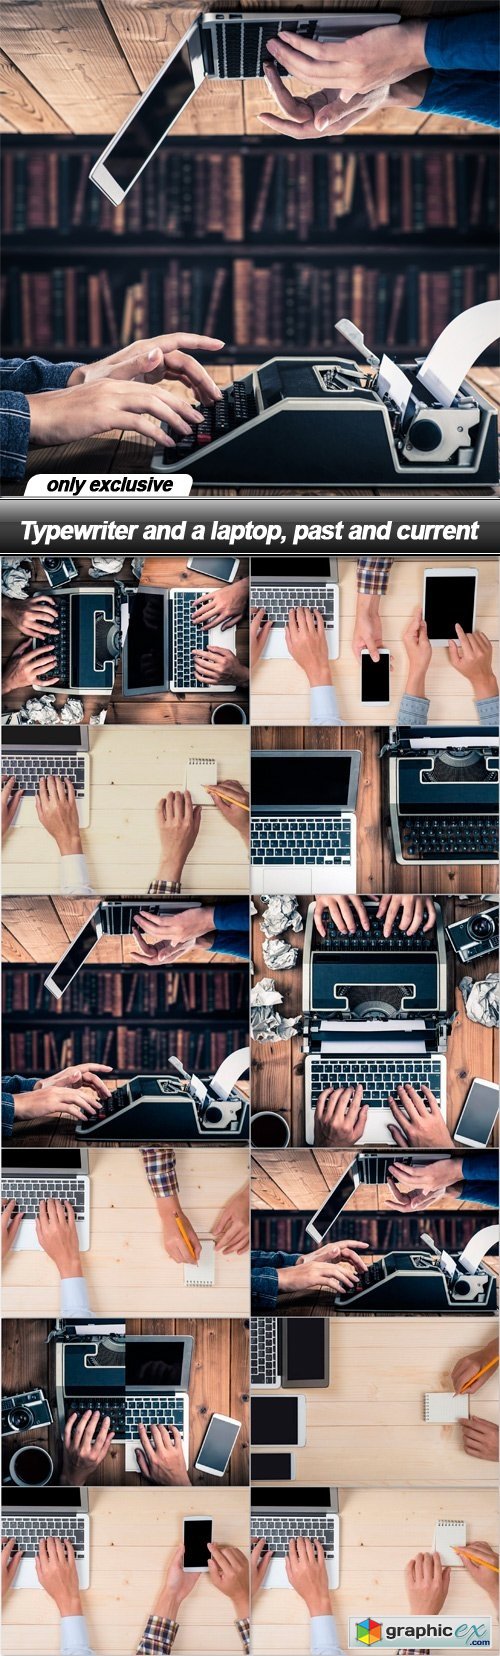 Typewriter and a laptop, past and current - 12 UHQ JPEG